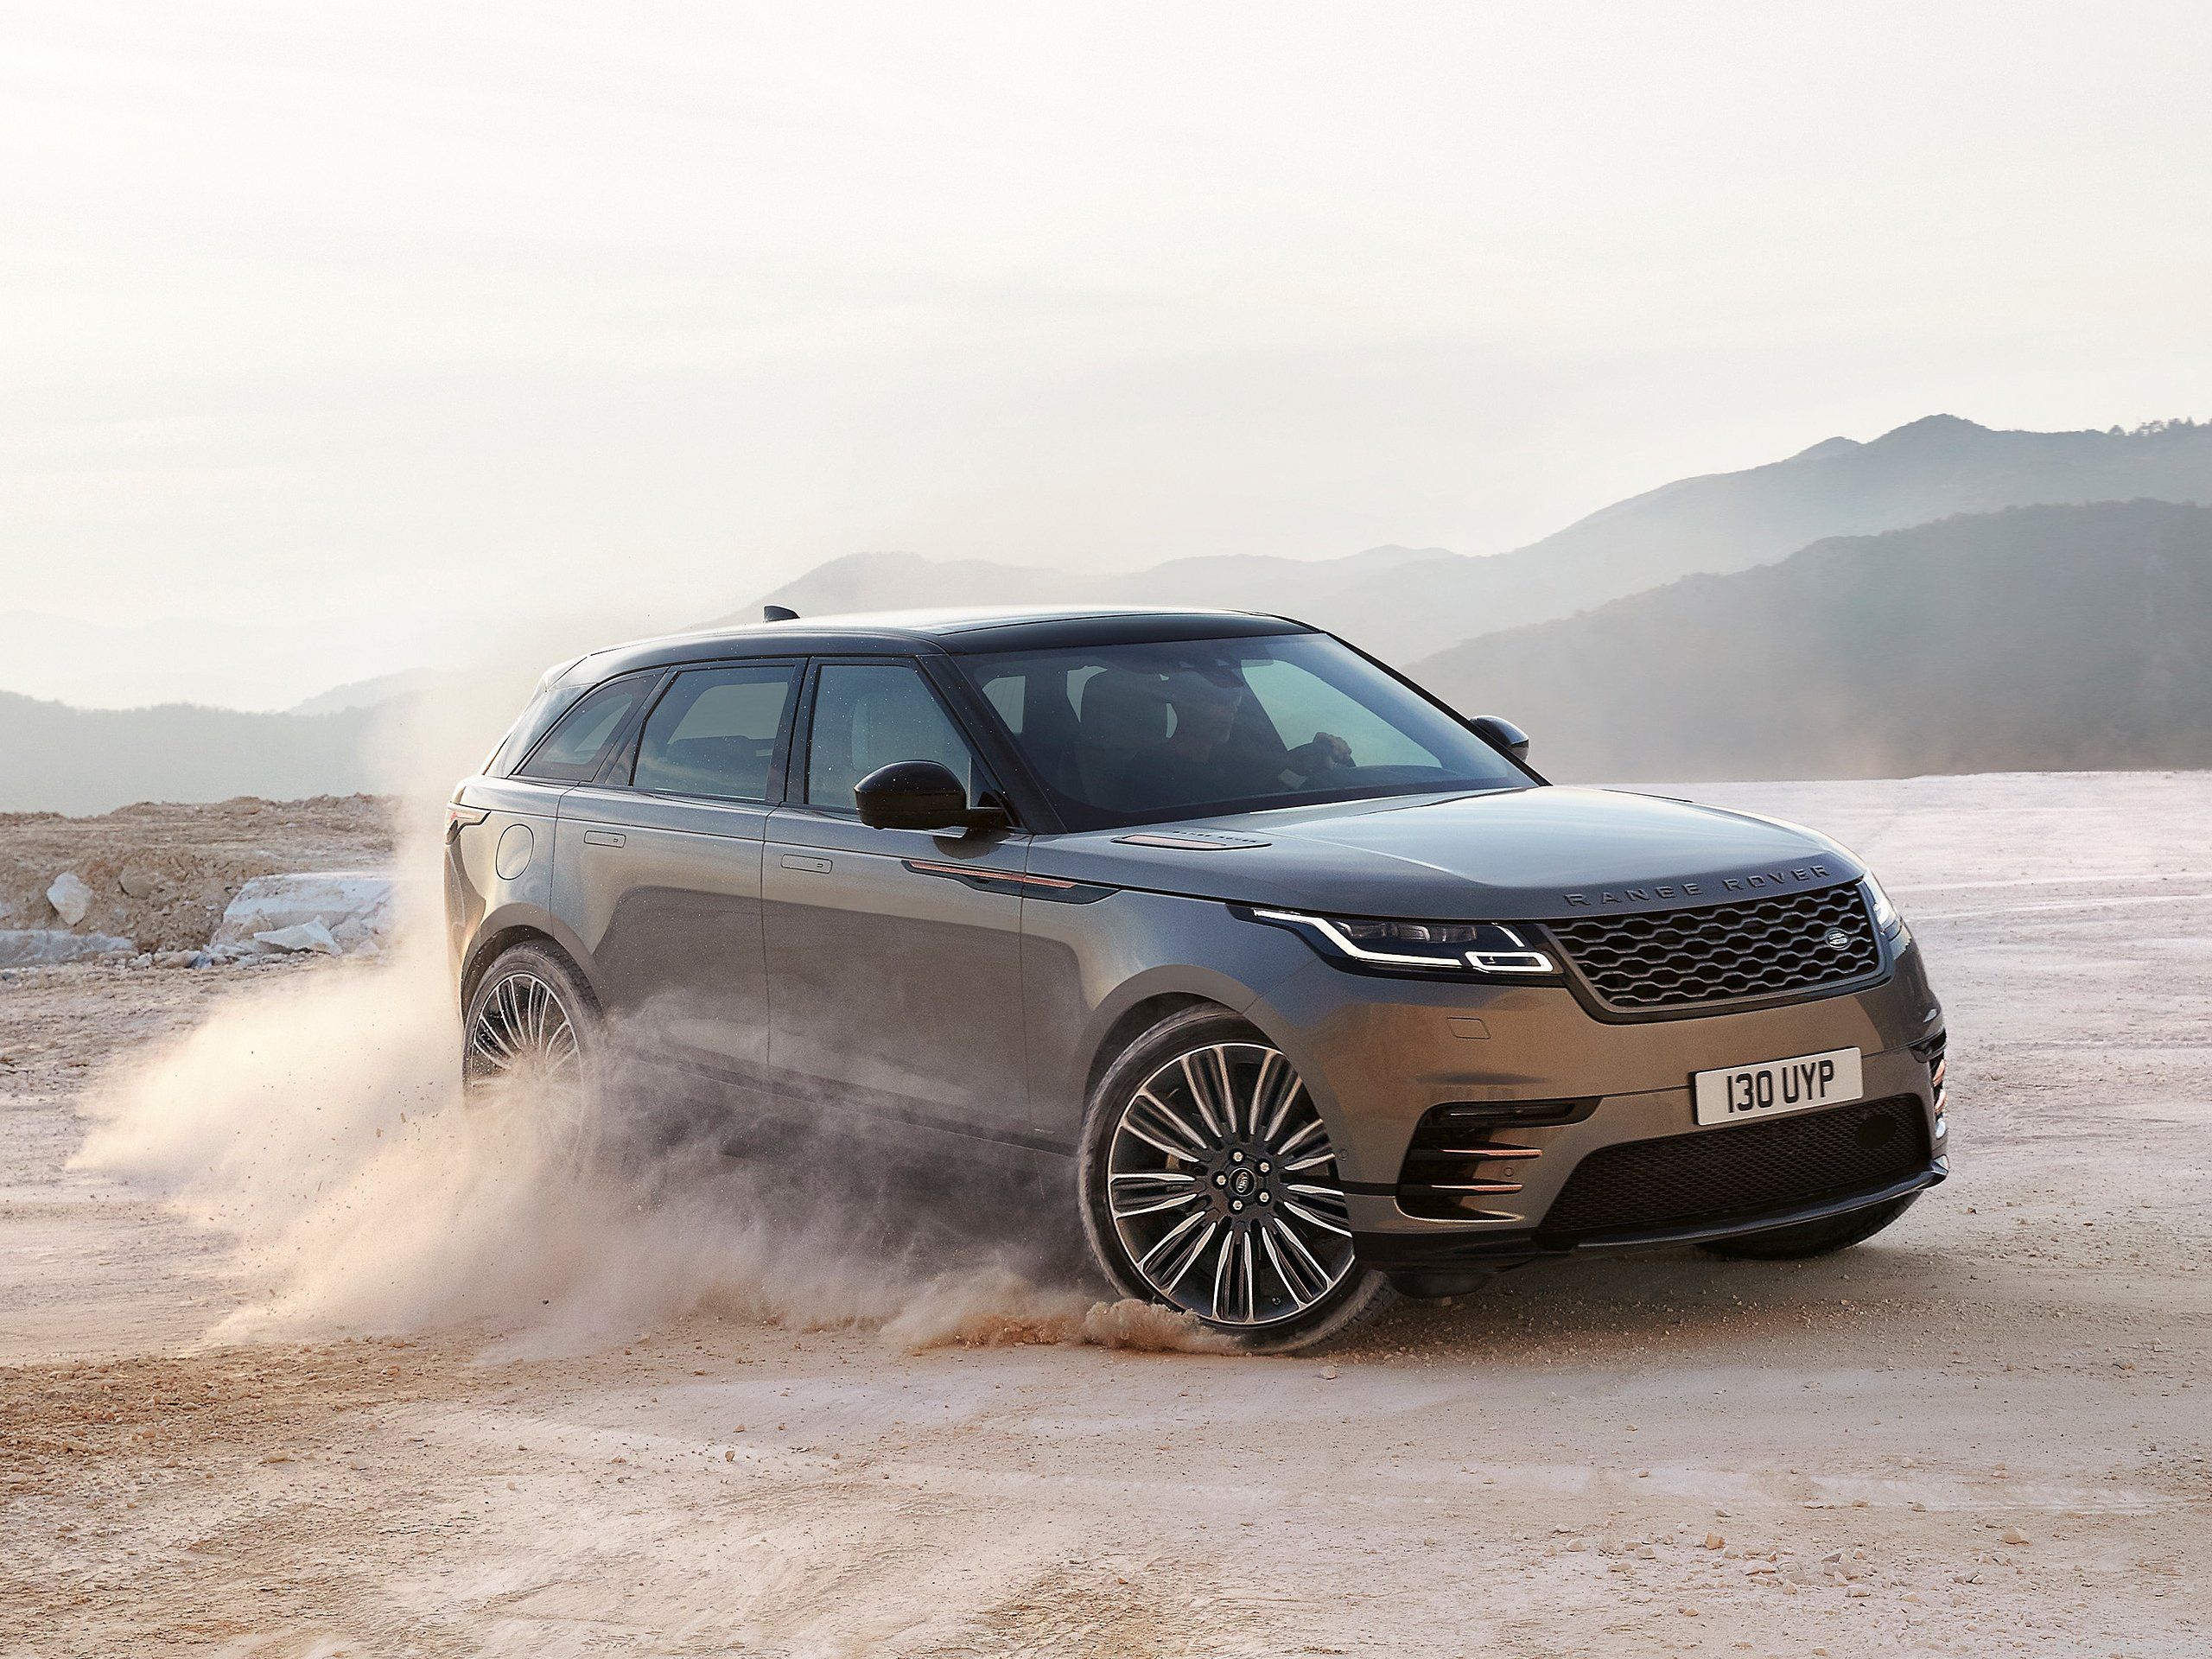 Land Rover Range Rover Velar, HD Cars, 4k Wallpaper, Image, Background, Photo and Picture